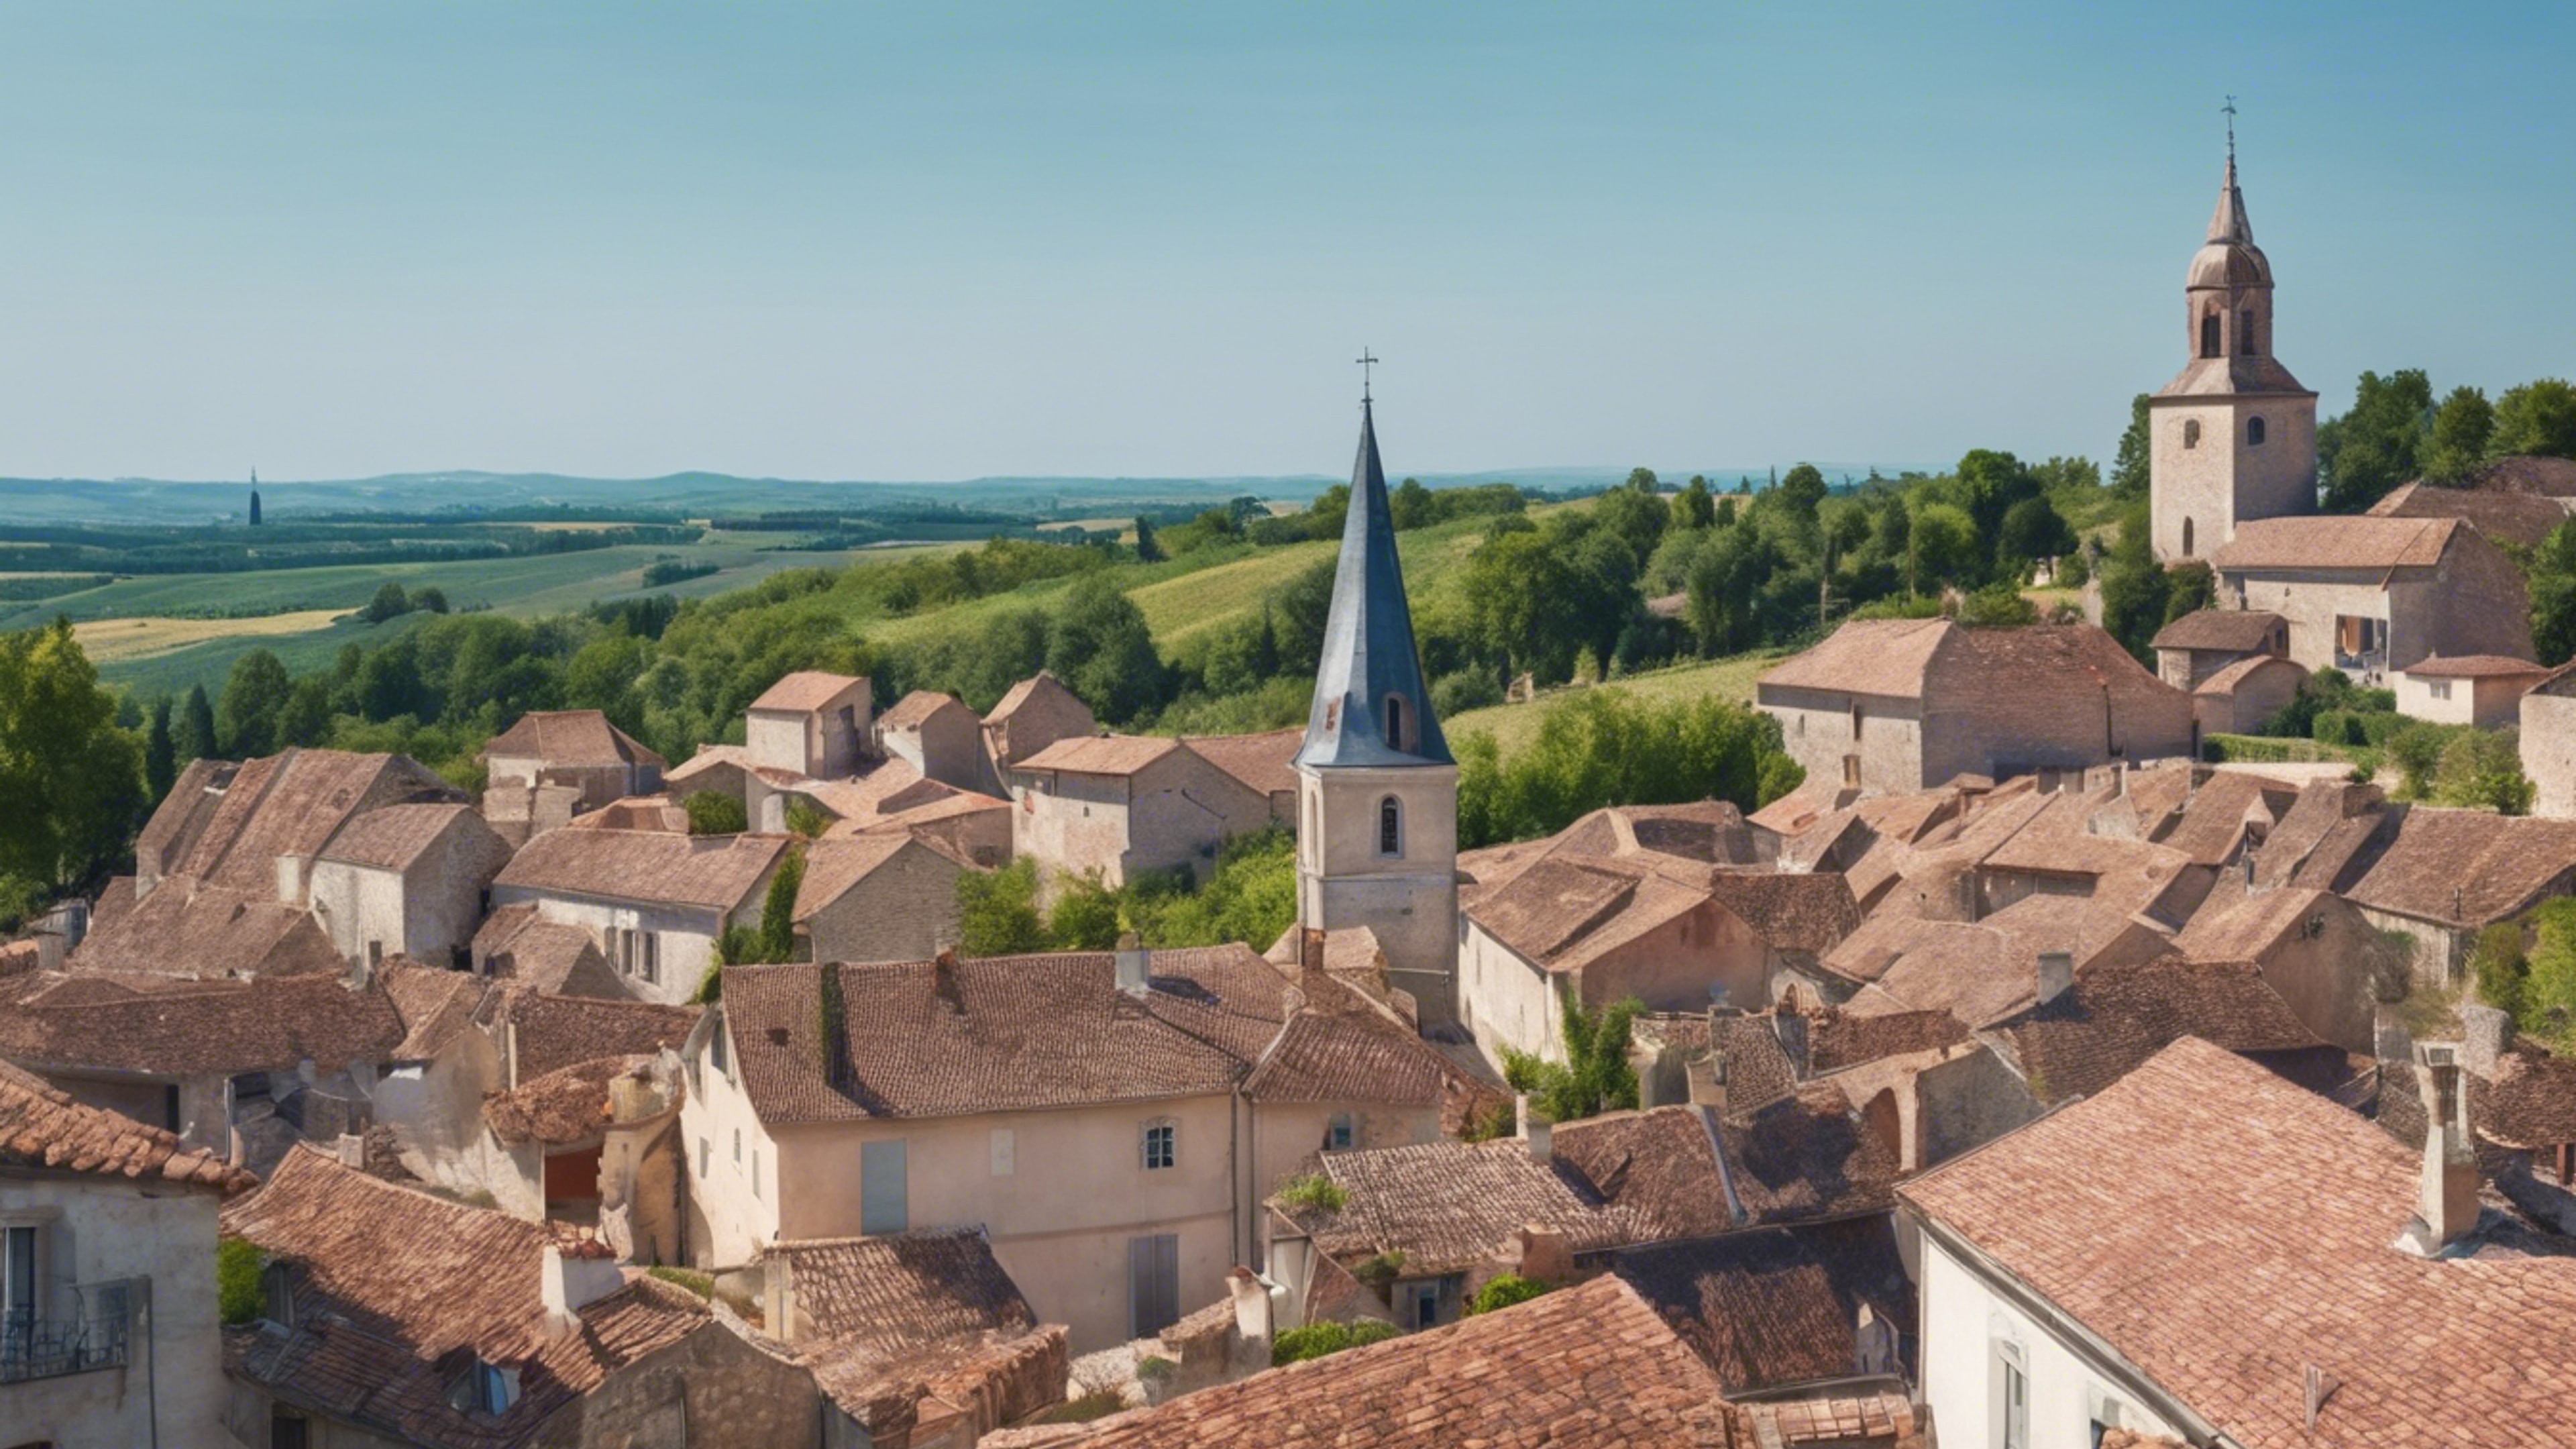 A panoramic view of a French country village with red-tiled roofs, a church spire, and surrounding vineyards under a clear blue sky. 墙纸[29c4a00e876546cab0f2]